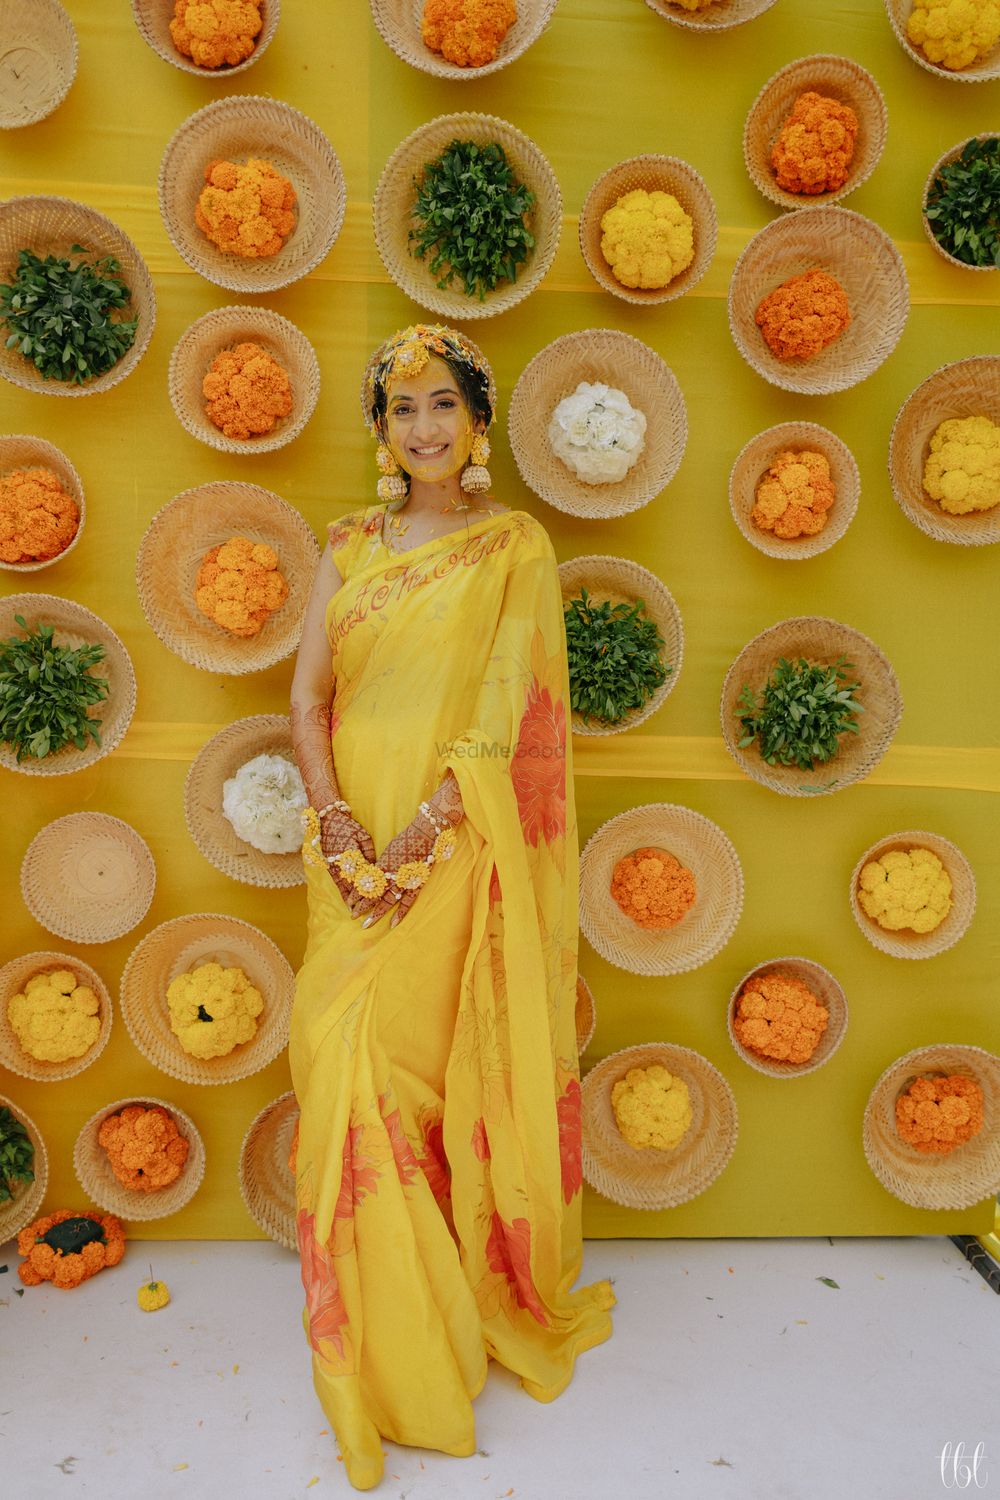 Photo of happy haldi wall decor idea for a stage or photobooth